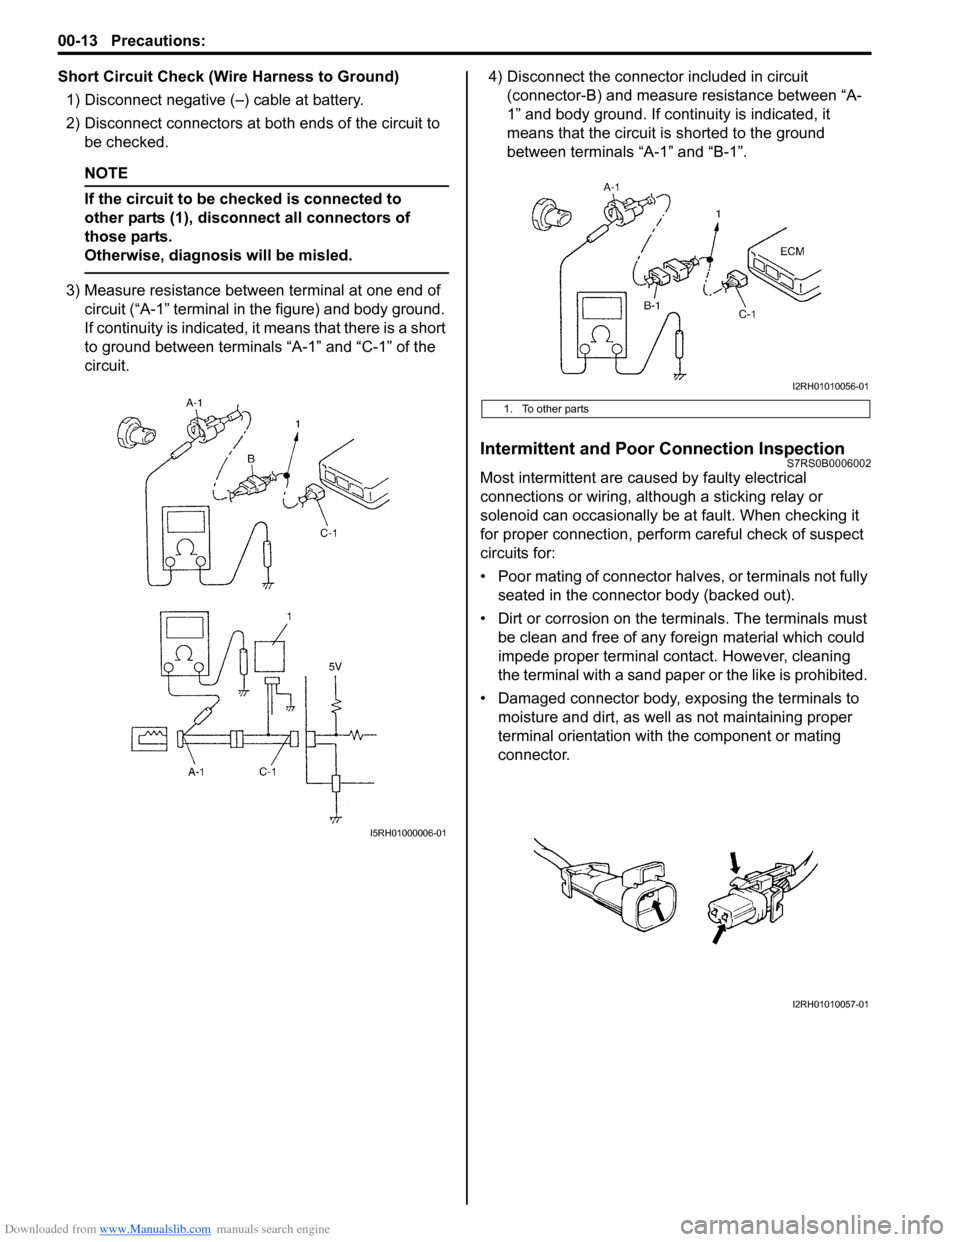 SUZUKI SWIFT 2005 2.G Service Workshop Manual Downloaded from www.Manualslib.com manuals search engine 00-13 Precautions: 
Short Circuit Check (Wire Harness to Ground)1) Disconnect negative (–) cable at battery.
2) Disconnect connectors at bot 